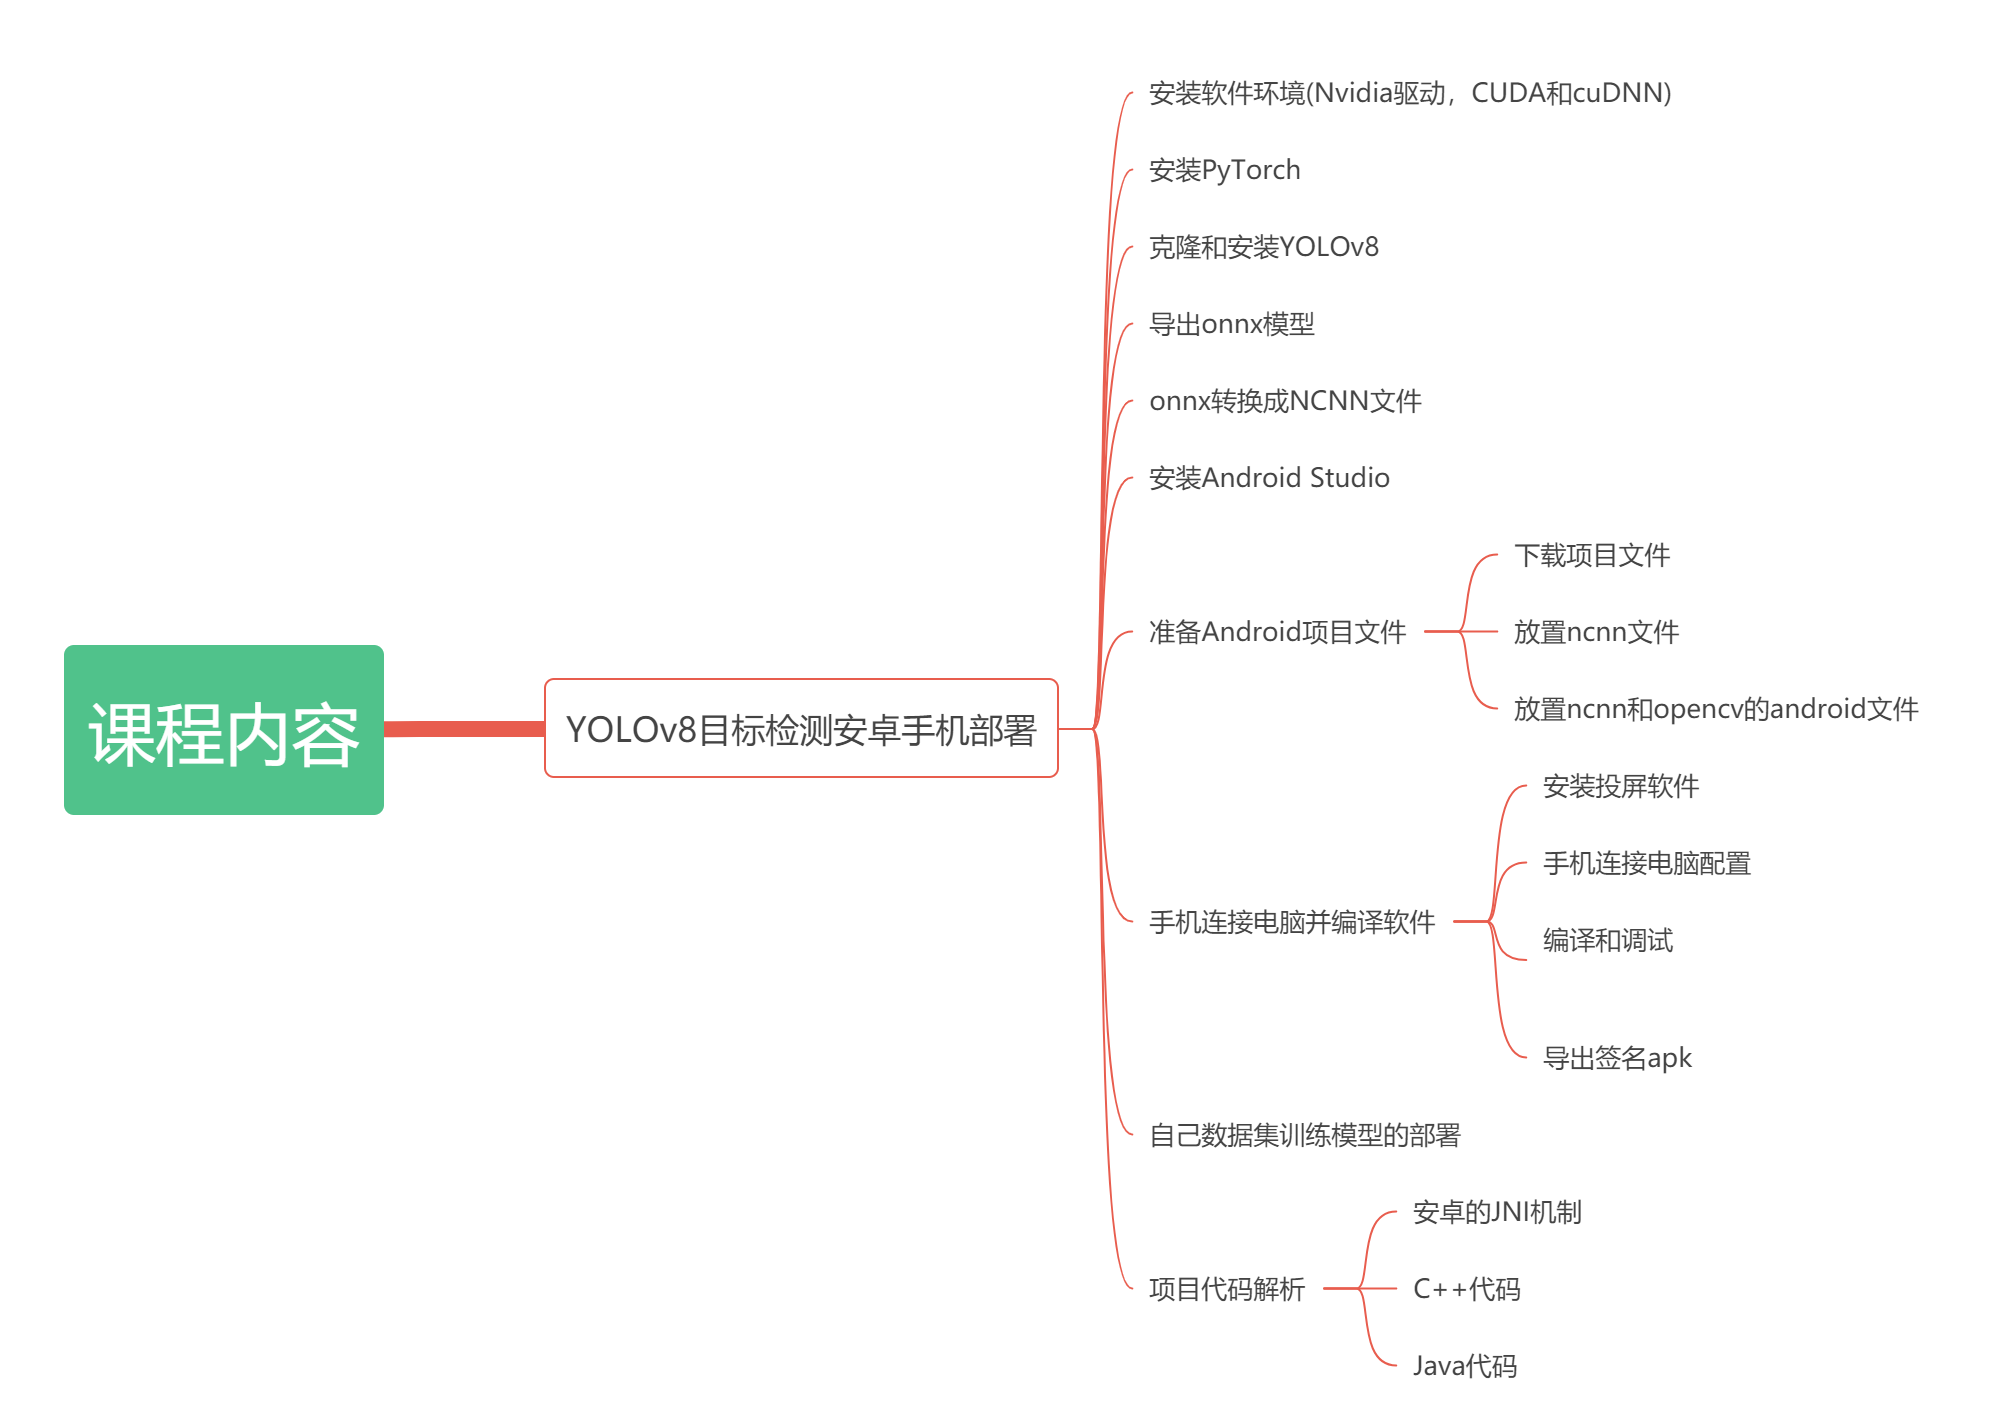 YOLOv8目标检测实战：Android手机部署 (视频课程)_Android_02